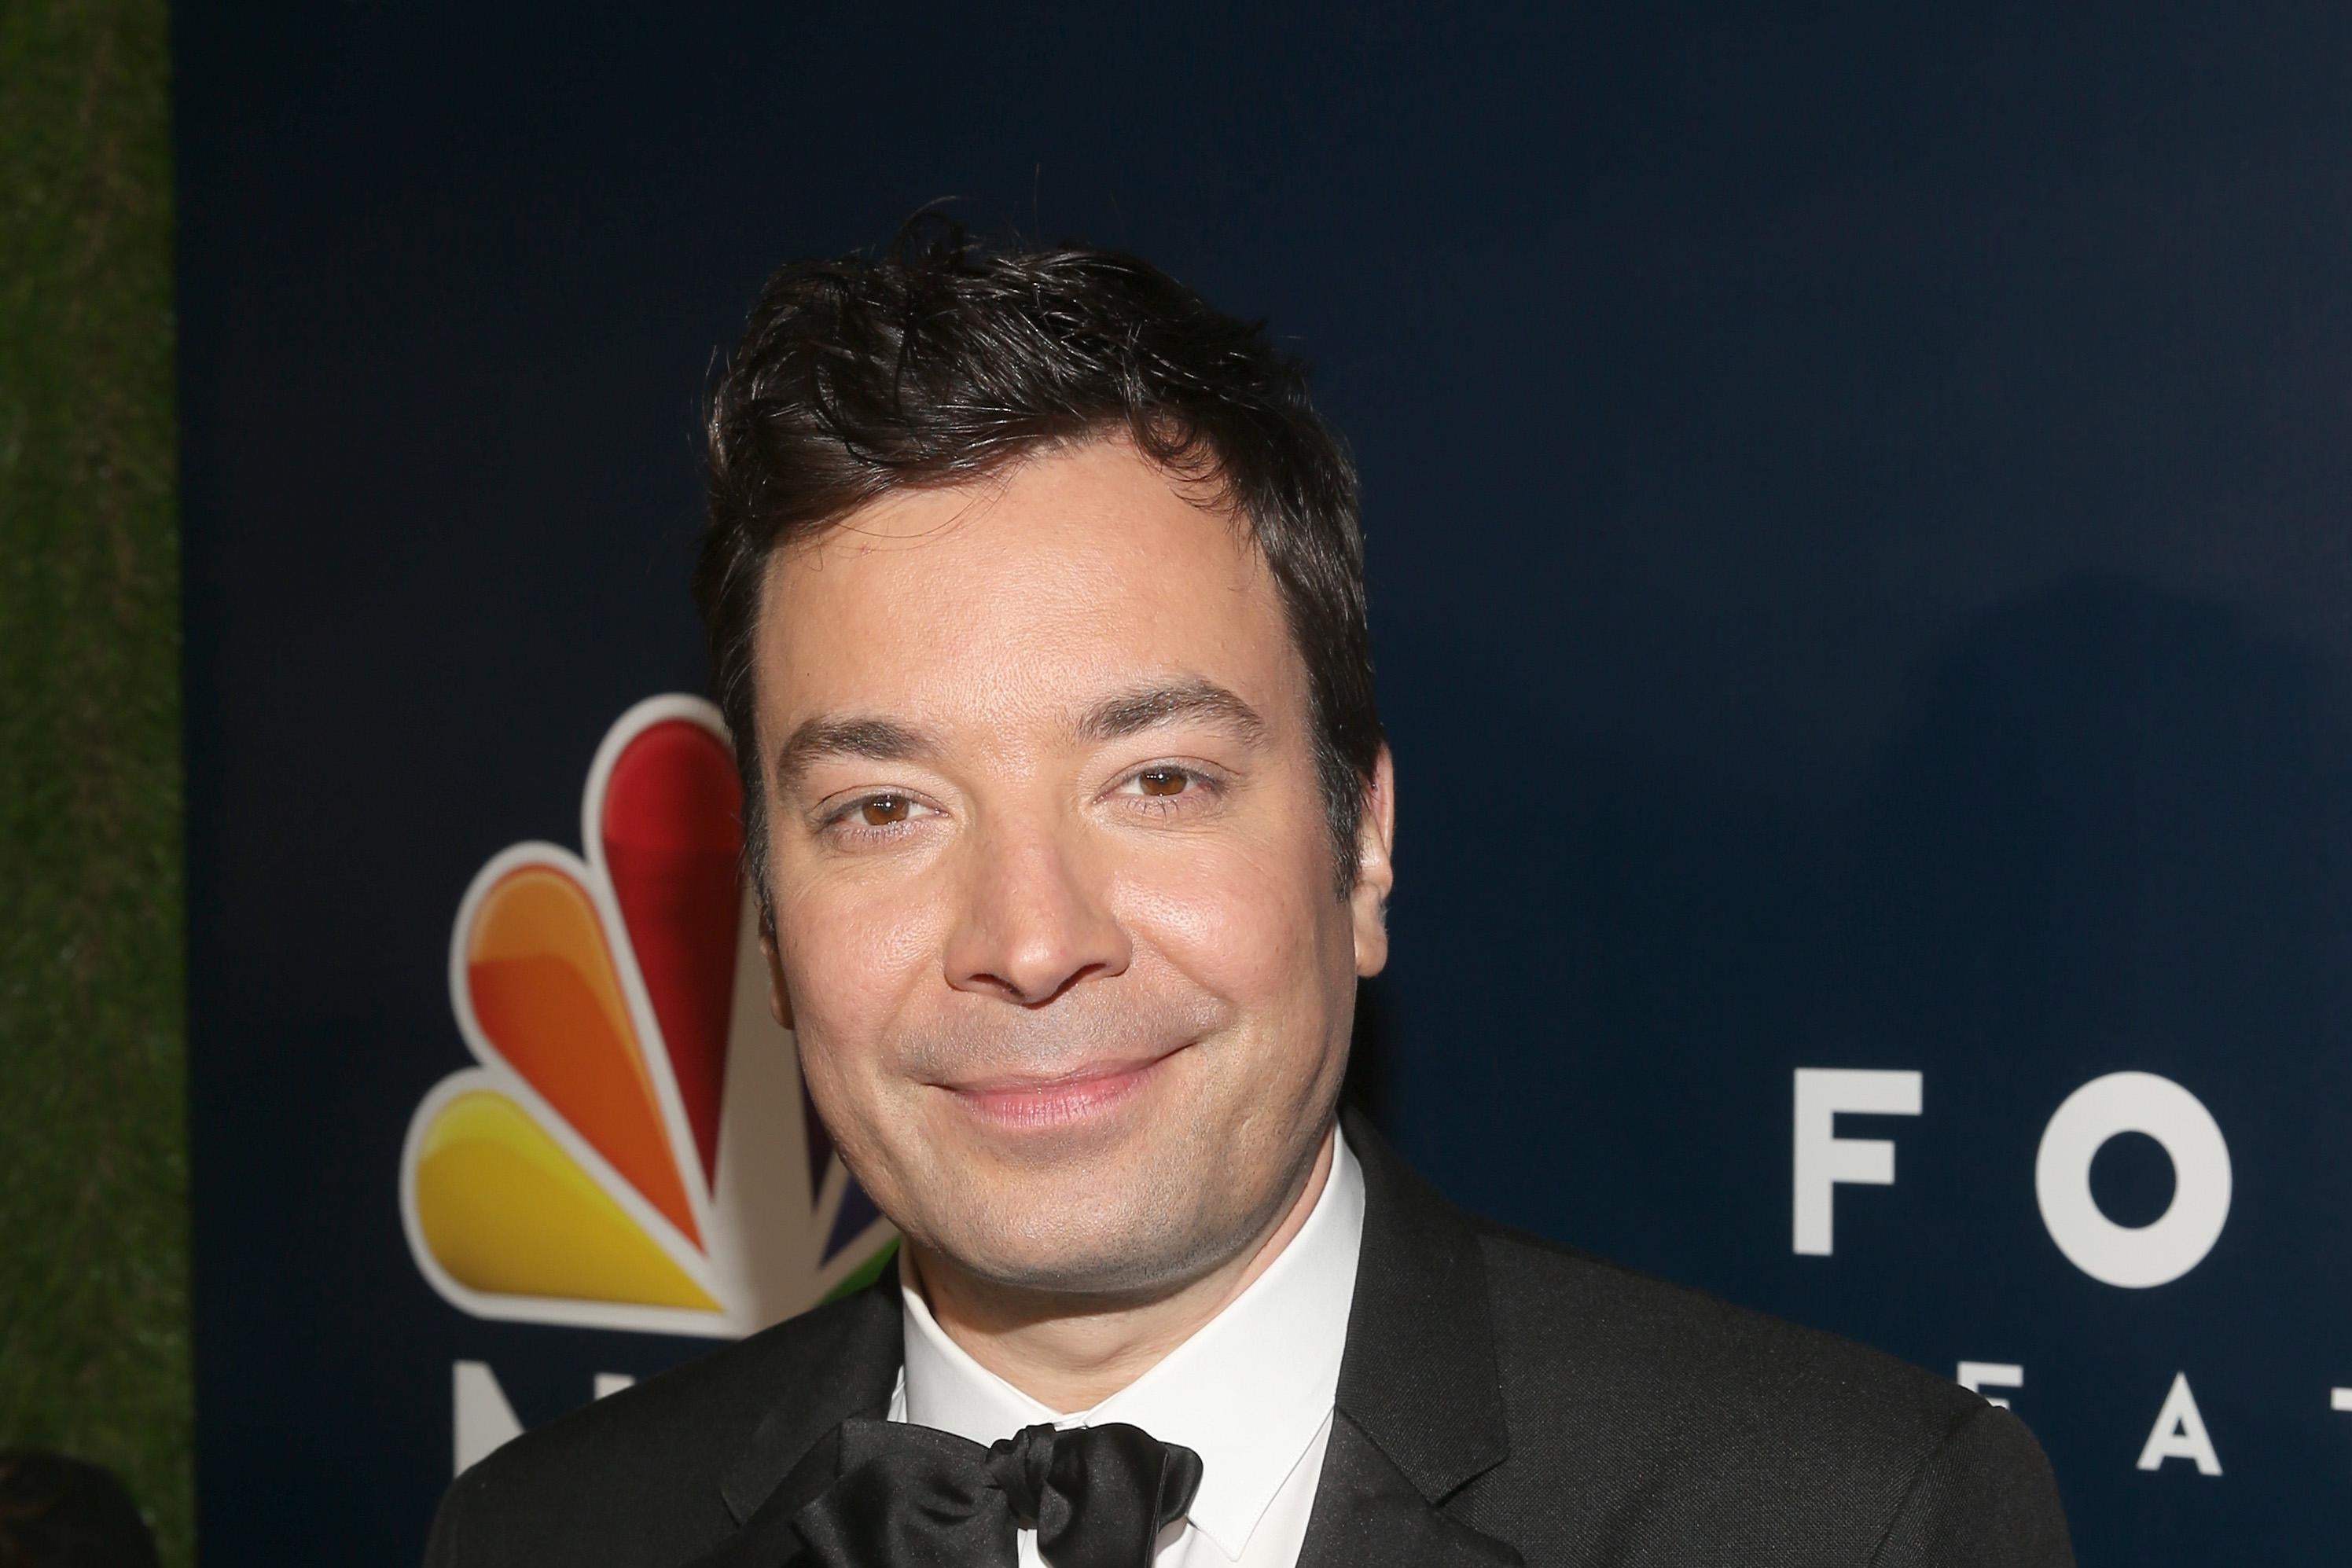 Jimmy Fallon attends a Golden Globes afterparty in 2017.